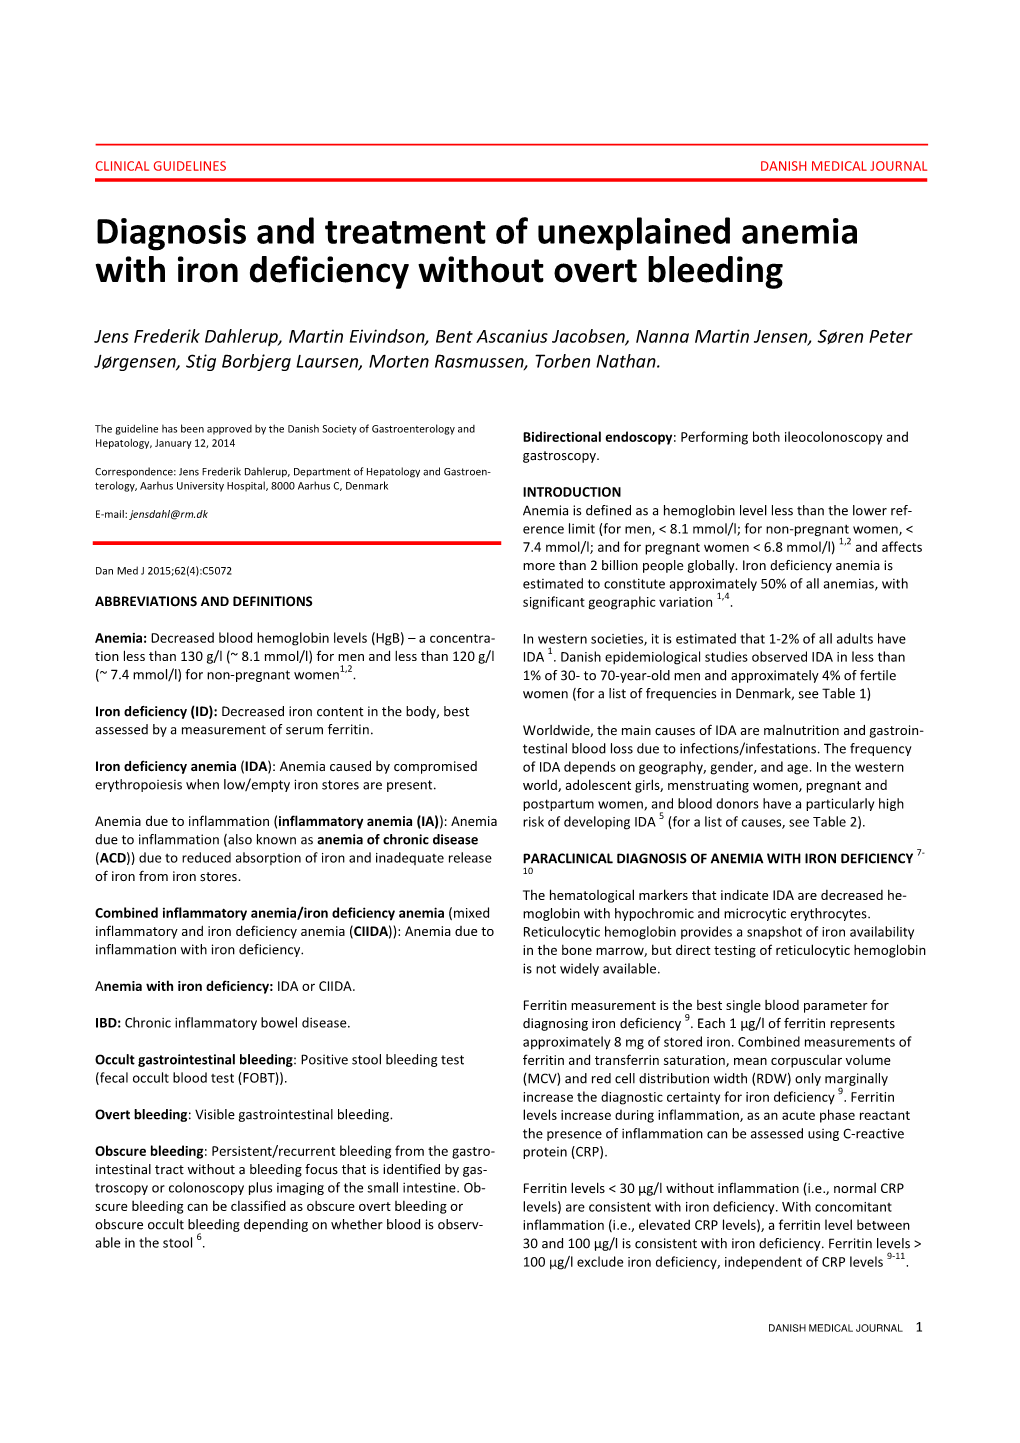 Diagnosis and Treatment of Unexplained Anemia with Iron Deficiency Without Overt Bleeding